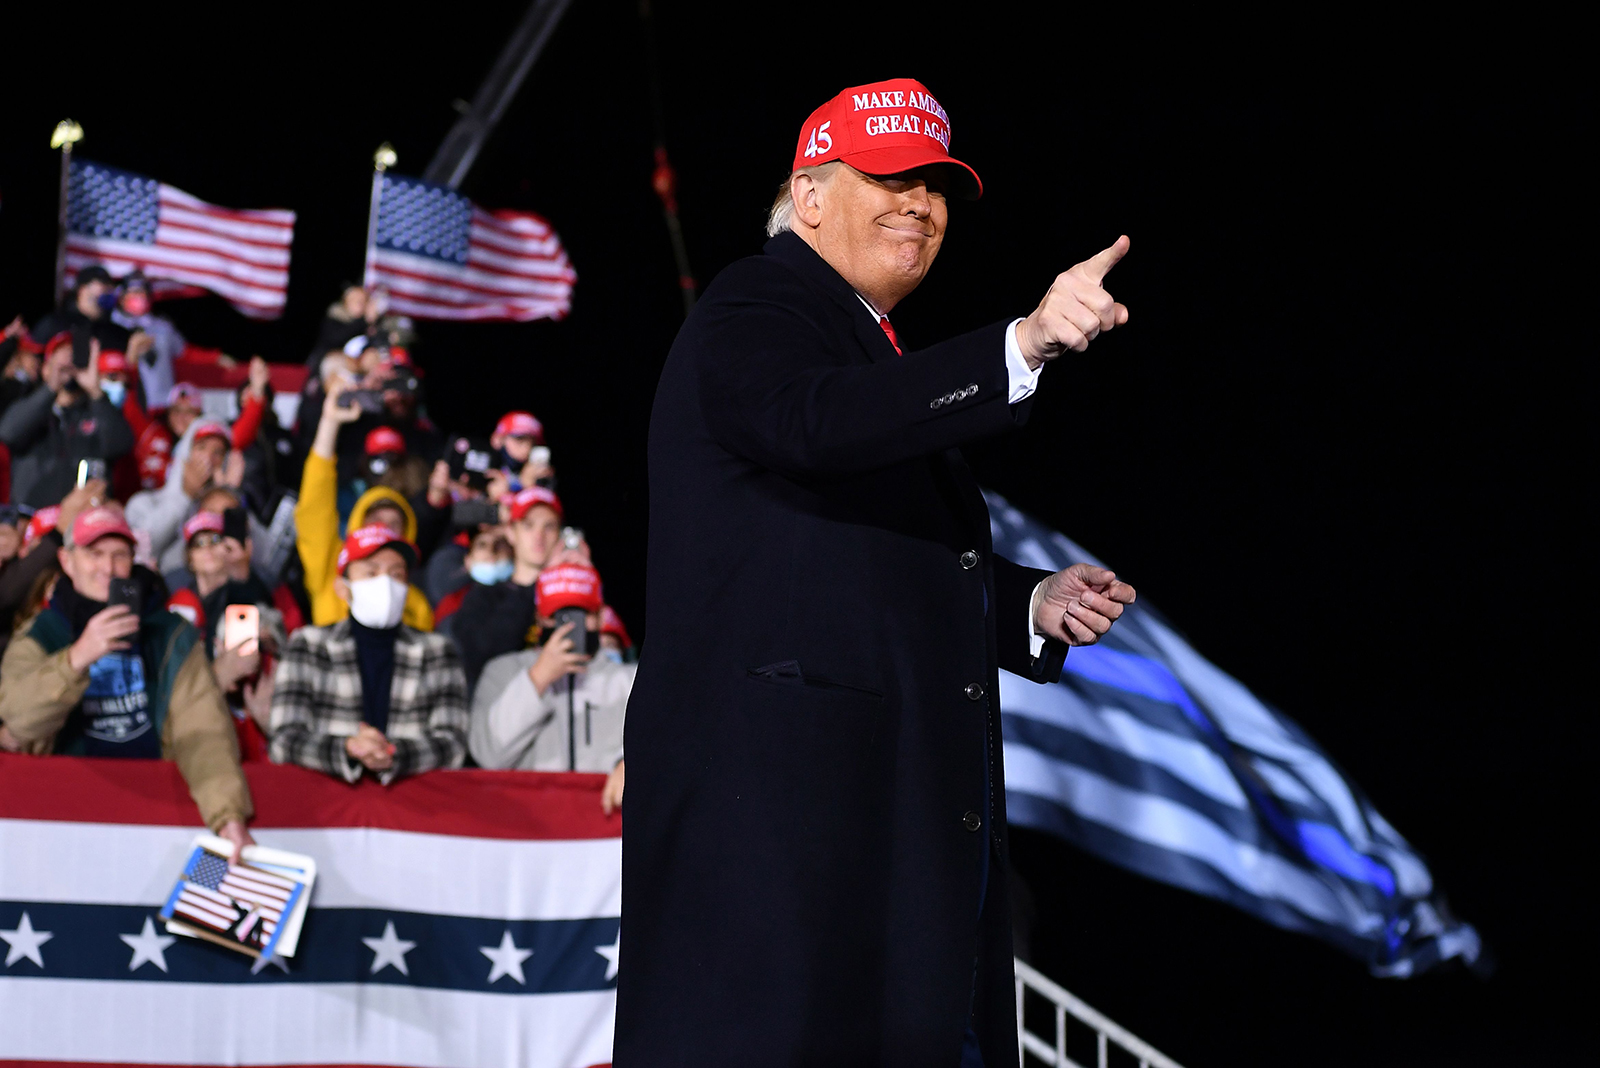 President Donald Trump gestures during a rally at Southern Wisconsin Regional Airport in Janesville, Wisconsin on October 17.